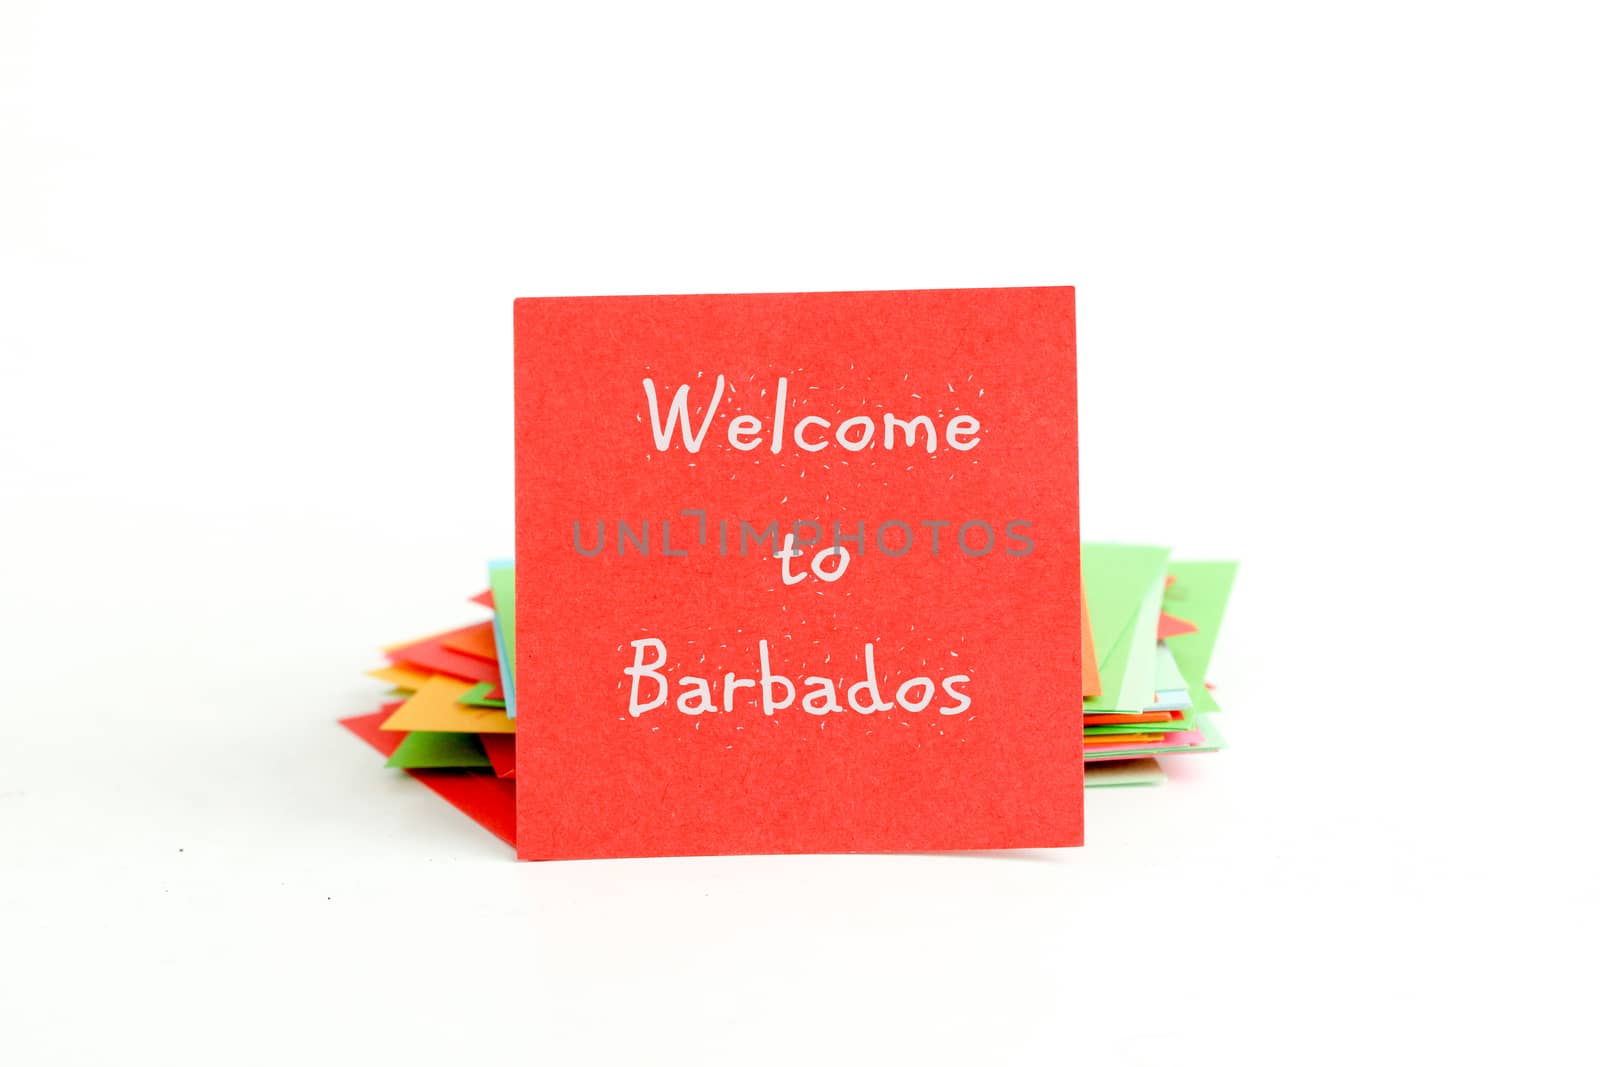 picture of a red note paper with text welcome to barbados